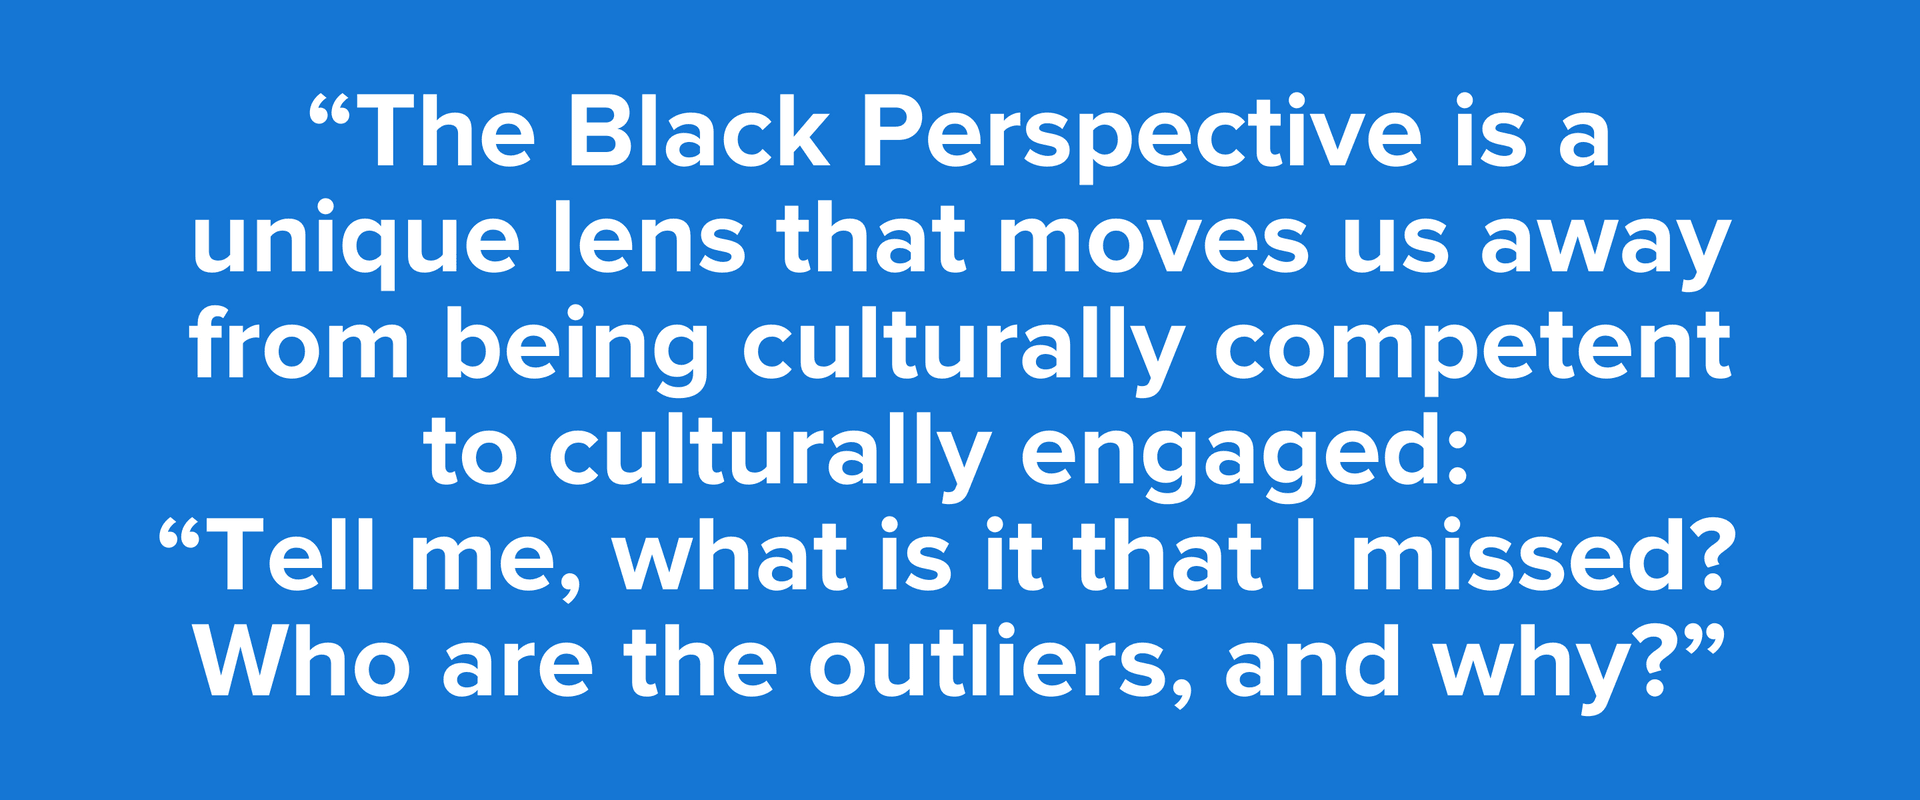 “The Black Perspective is a unique lens that moves us away from being culturally competent to culturally engaged: “Tell me, what is it that I missed? Who are the outliers, and why?”